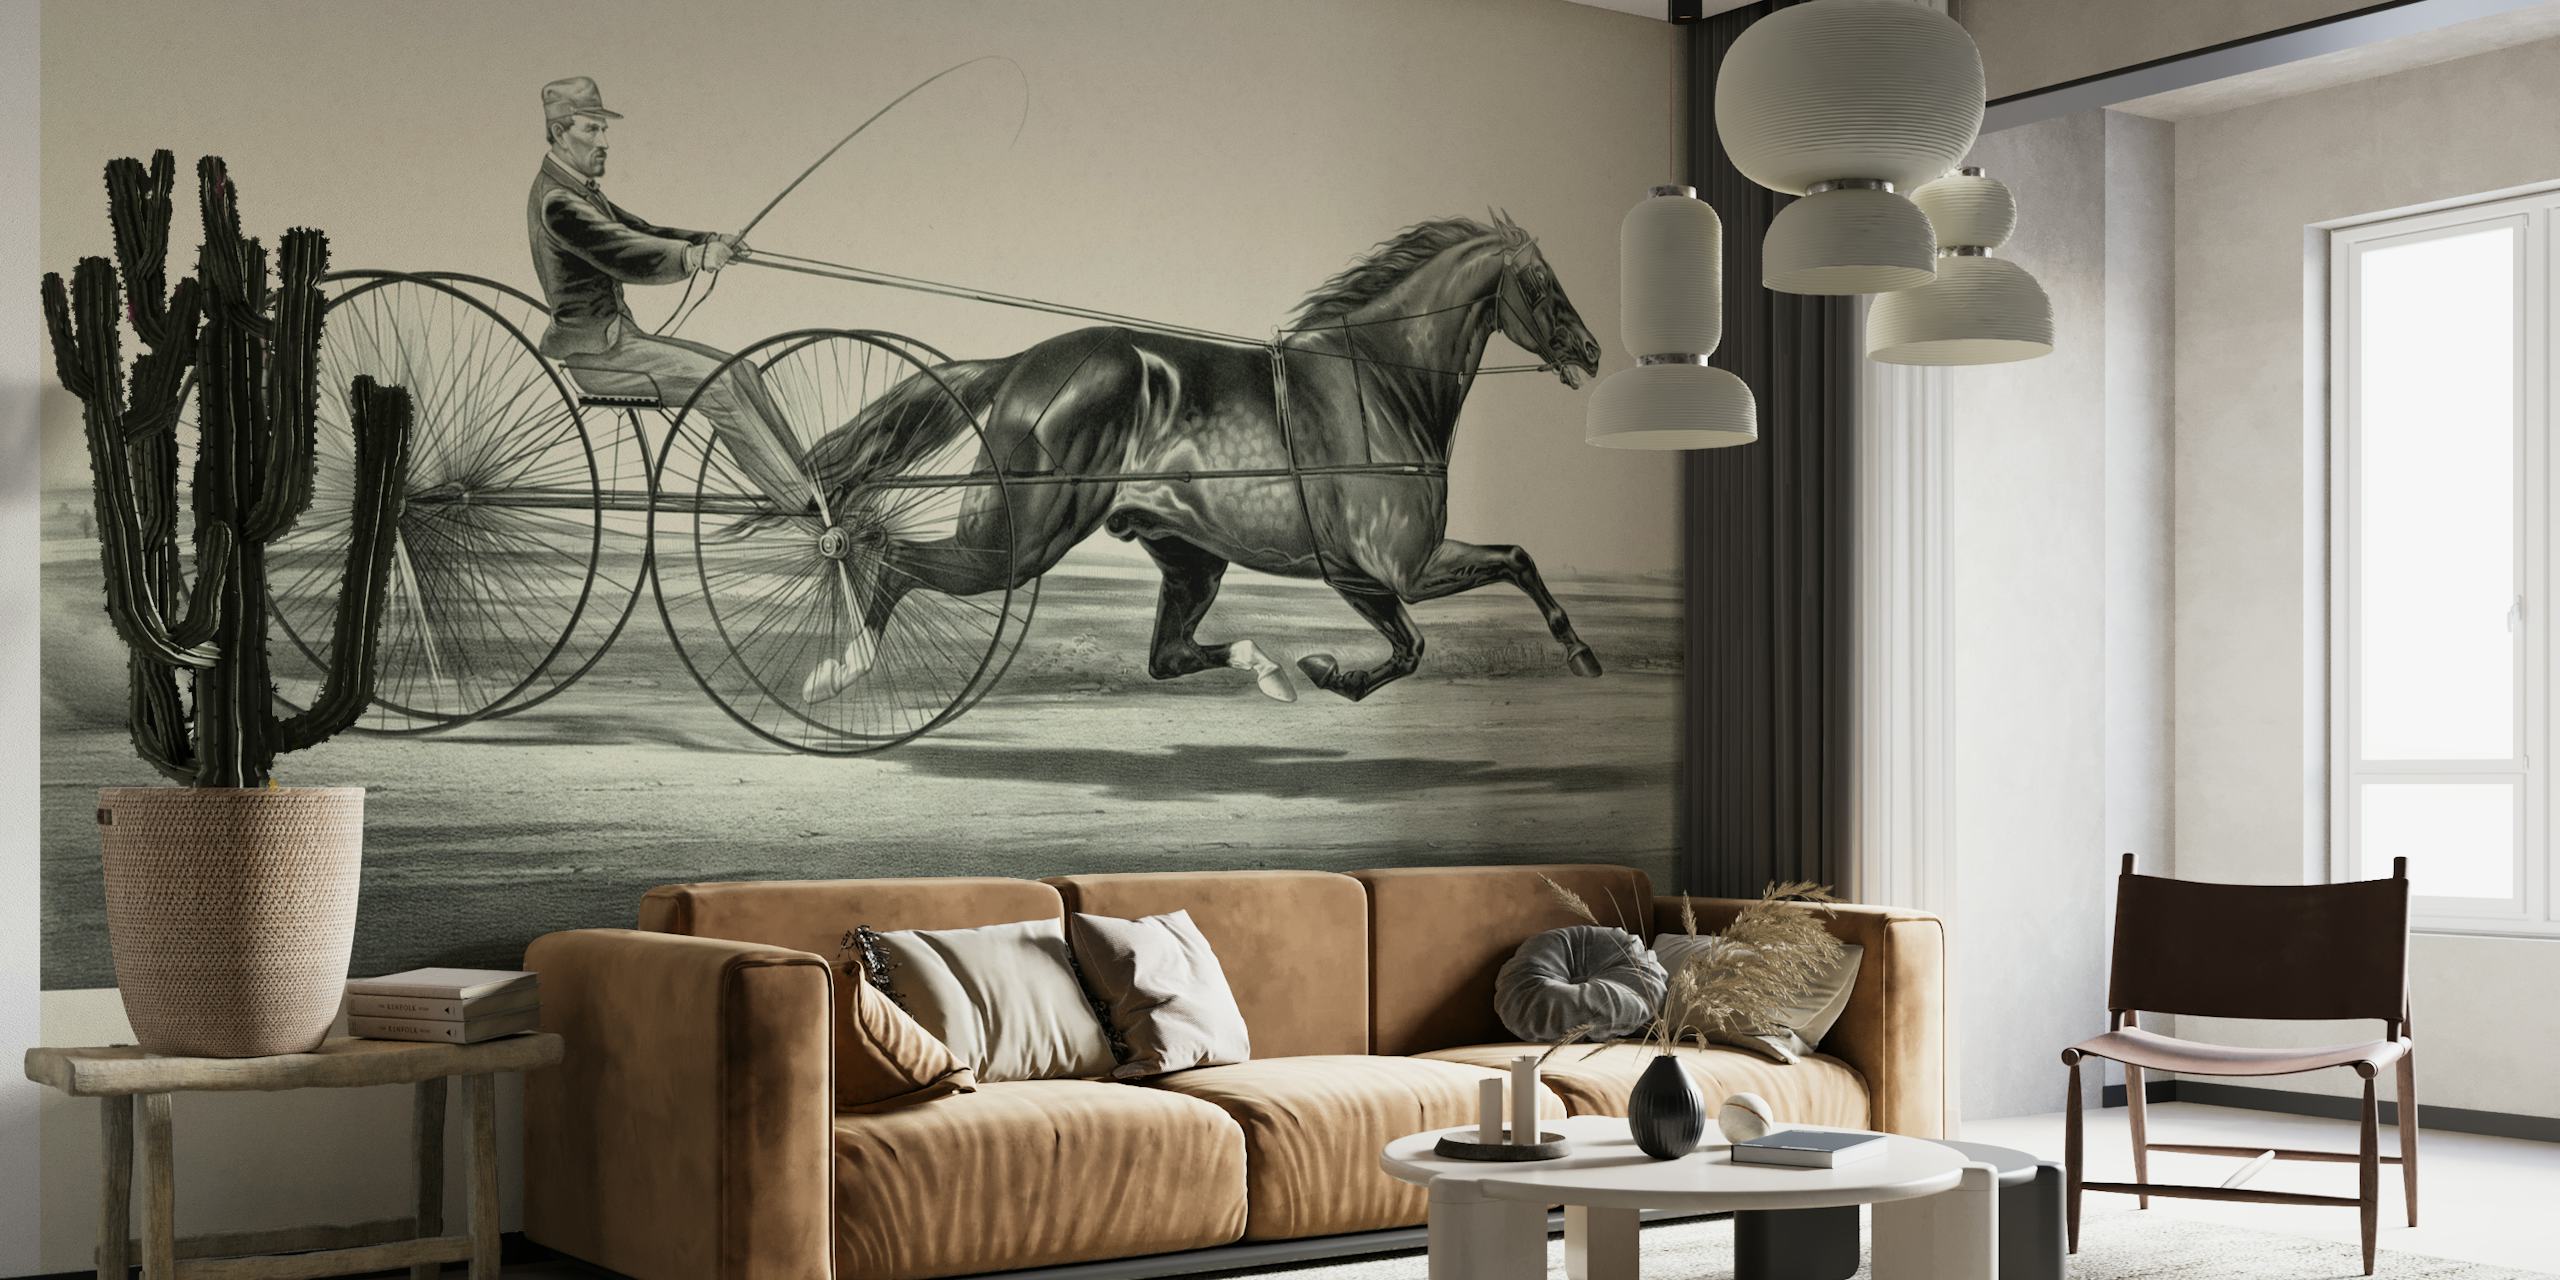 Monochrome historic horse race wall mural depicting a jockey in a horse-drawn chariot